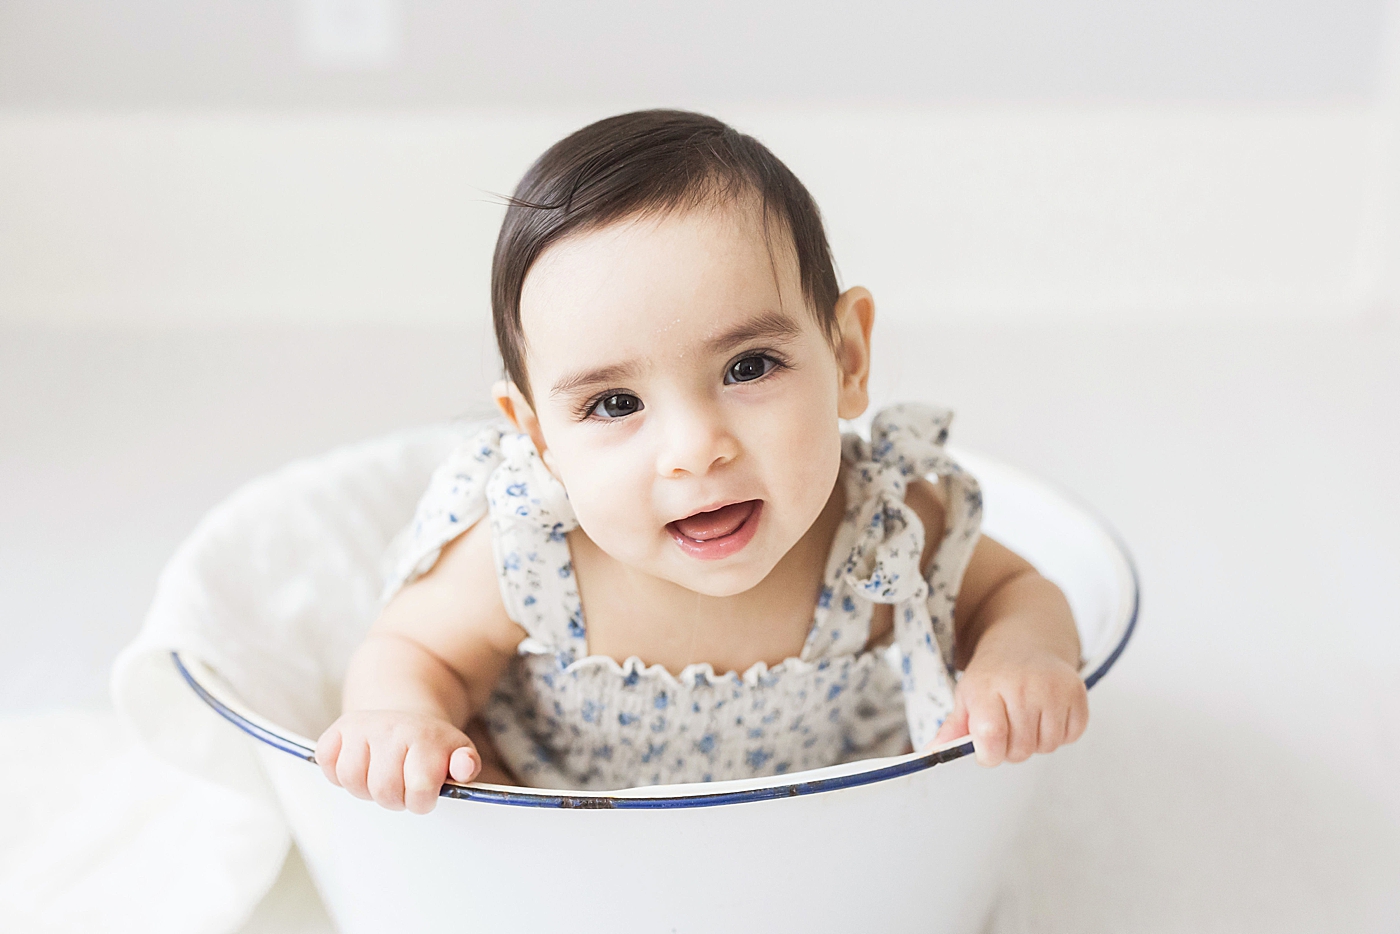 6 month old baby girl sitting in bowl for photos. Photo by Fresh Light Photography.